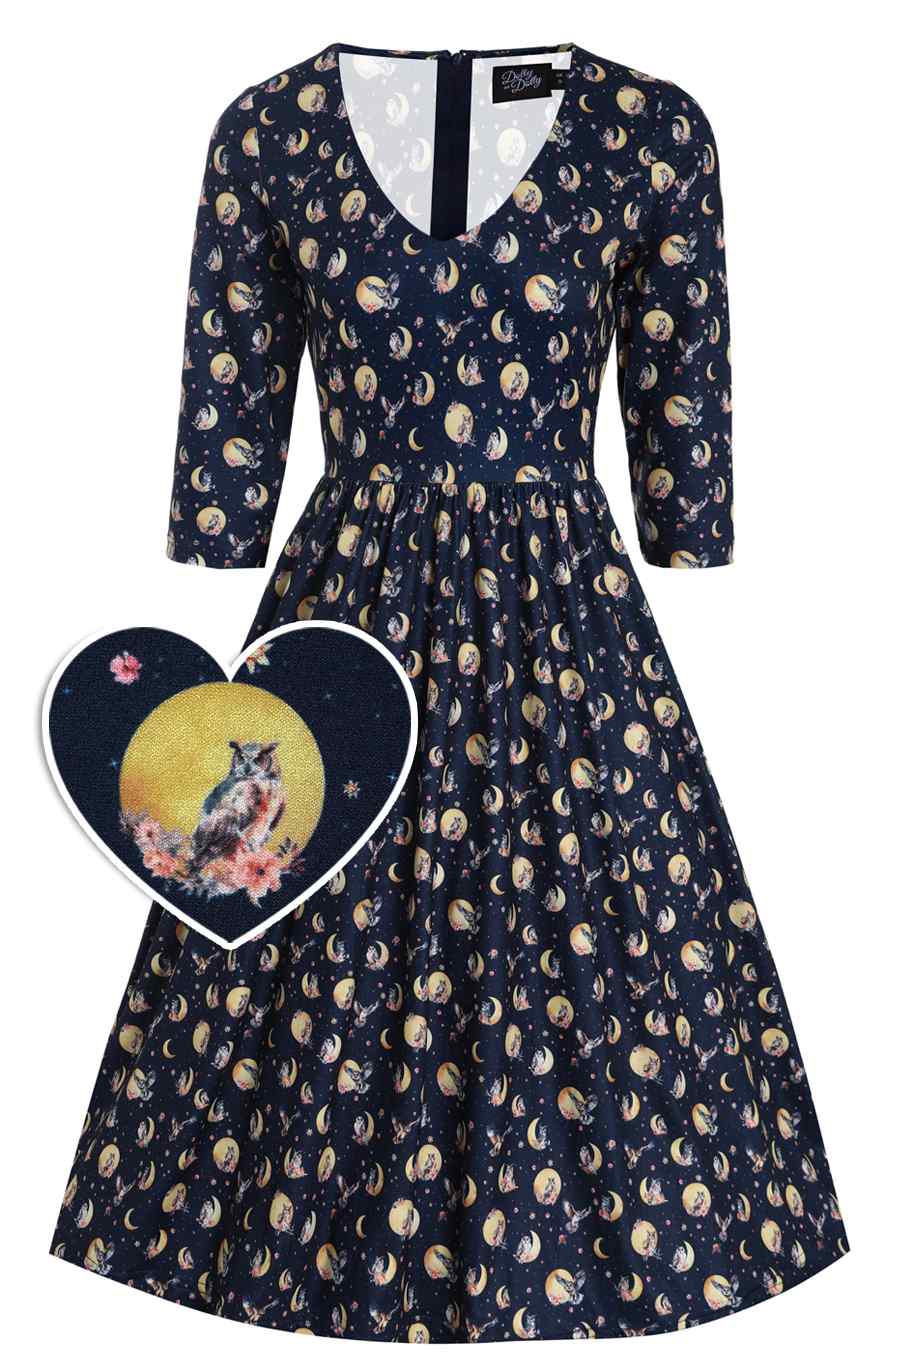 Front view of  Night Owl Print Dress in Navy Blue